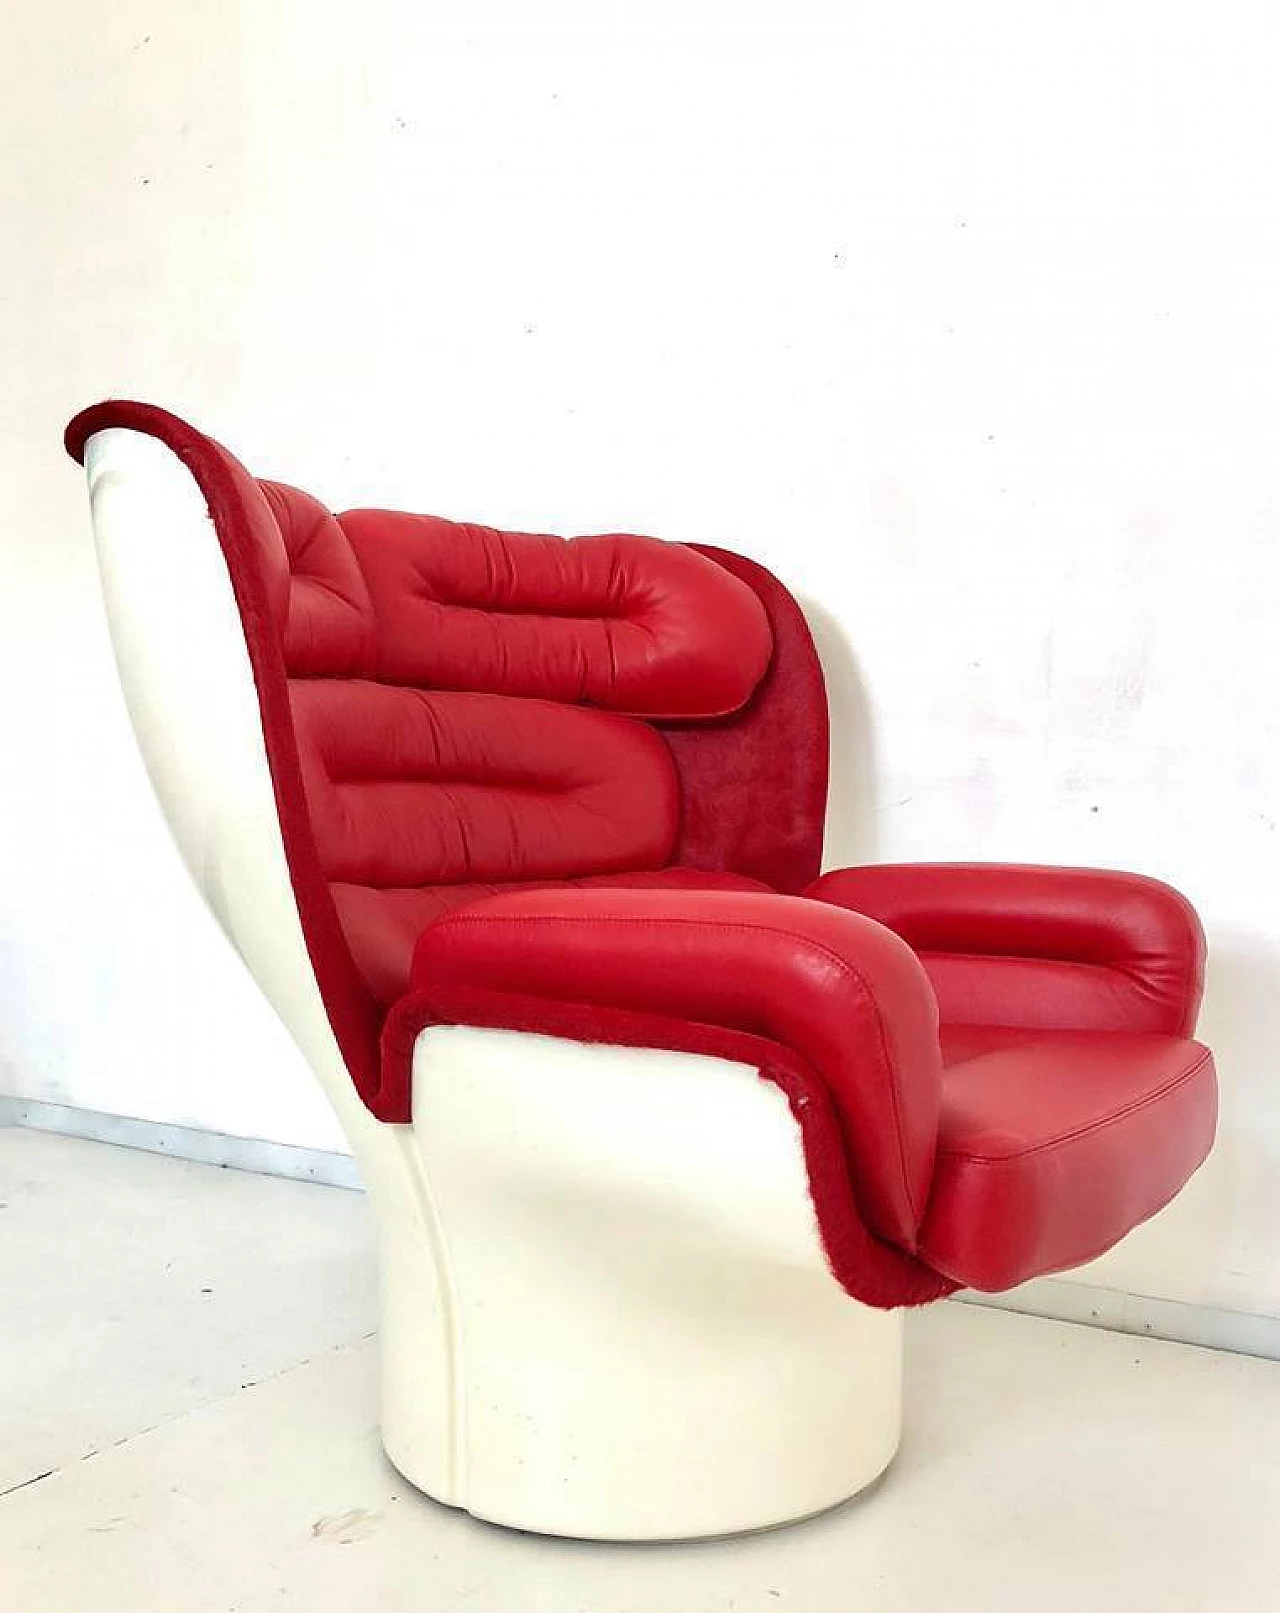 Armchair "Elda chair" by Joe Colombo for Confort '60s 2